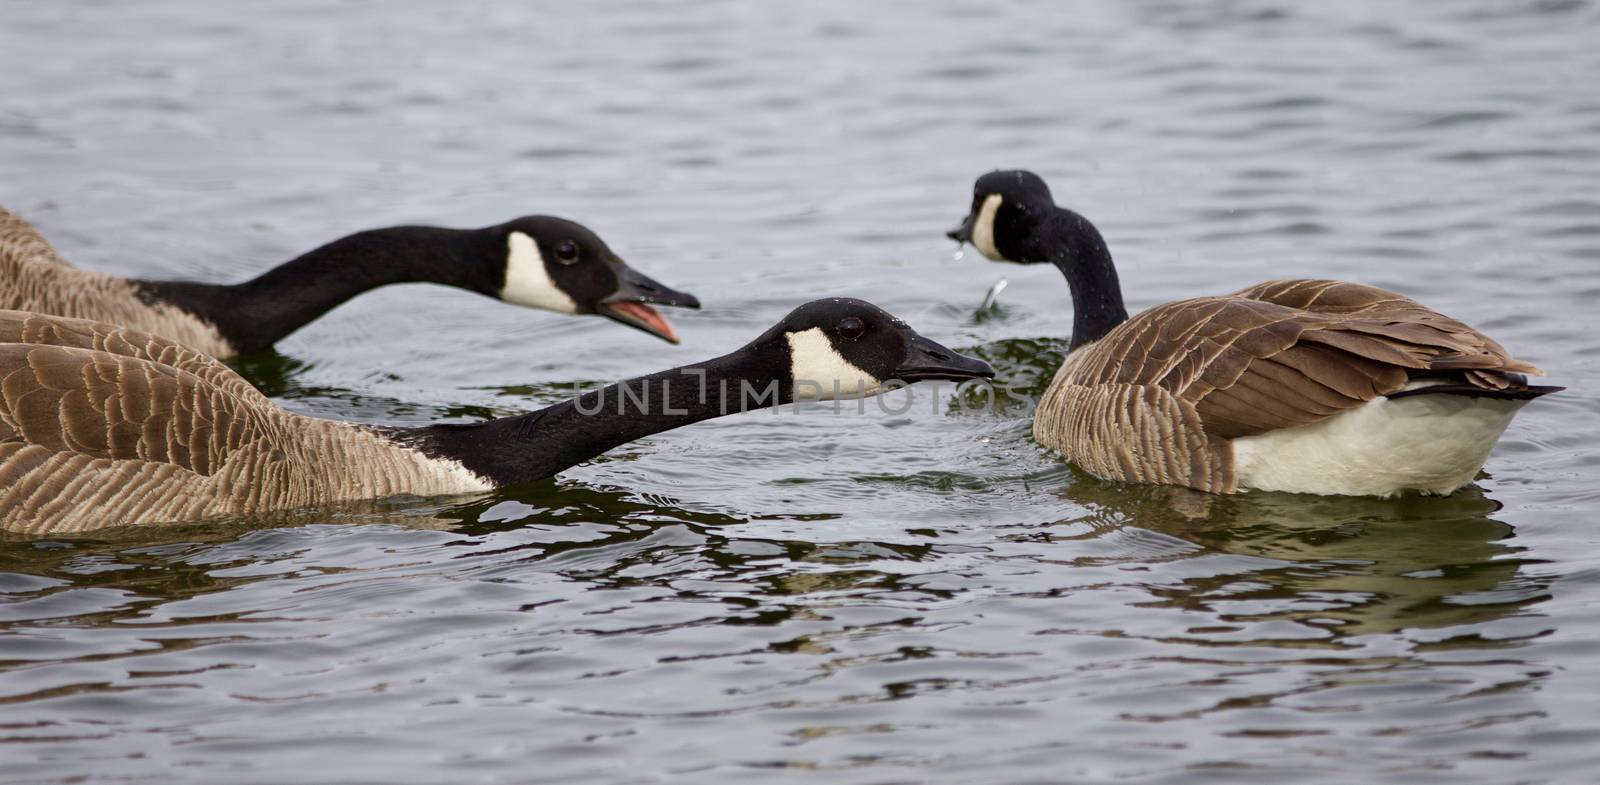 Three emotional Canada geese in the lake by teo